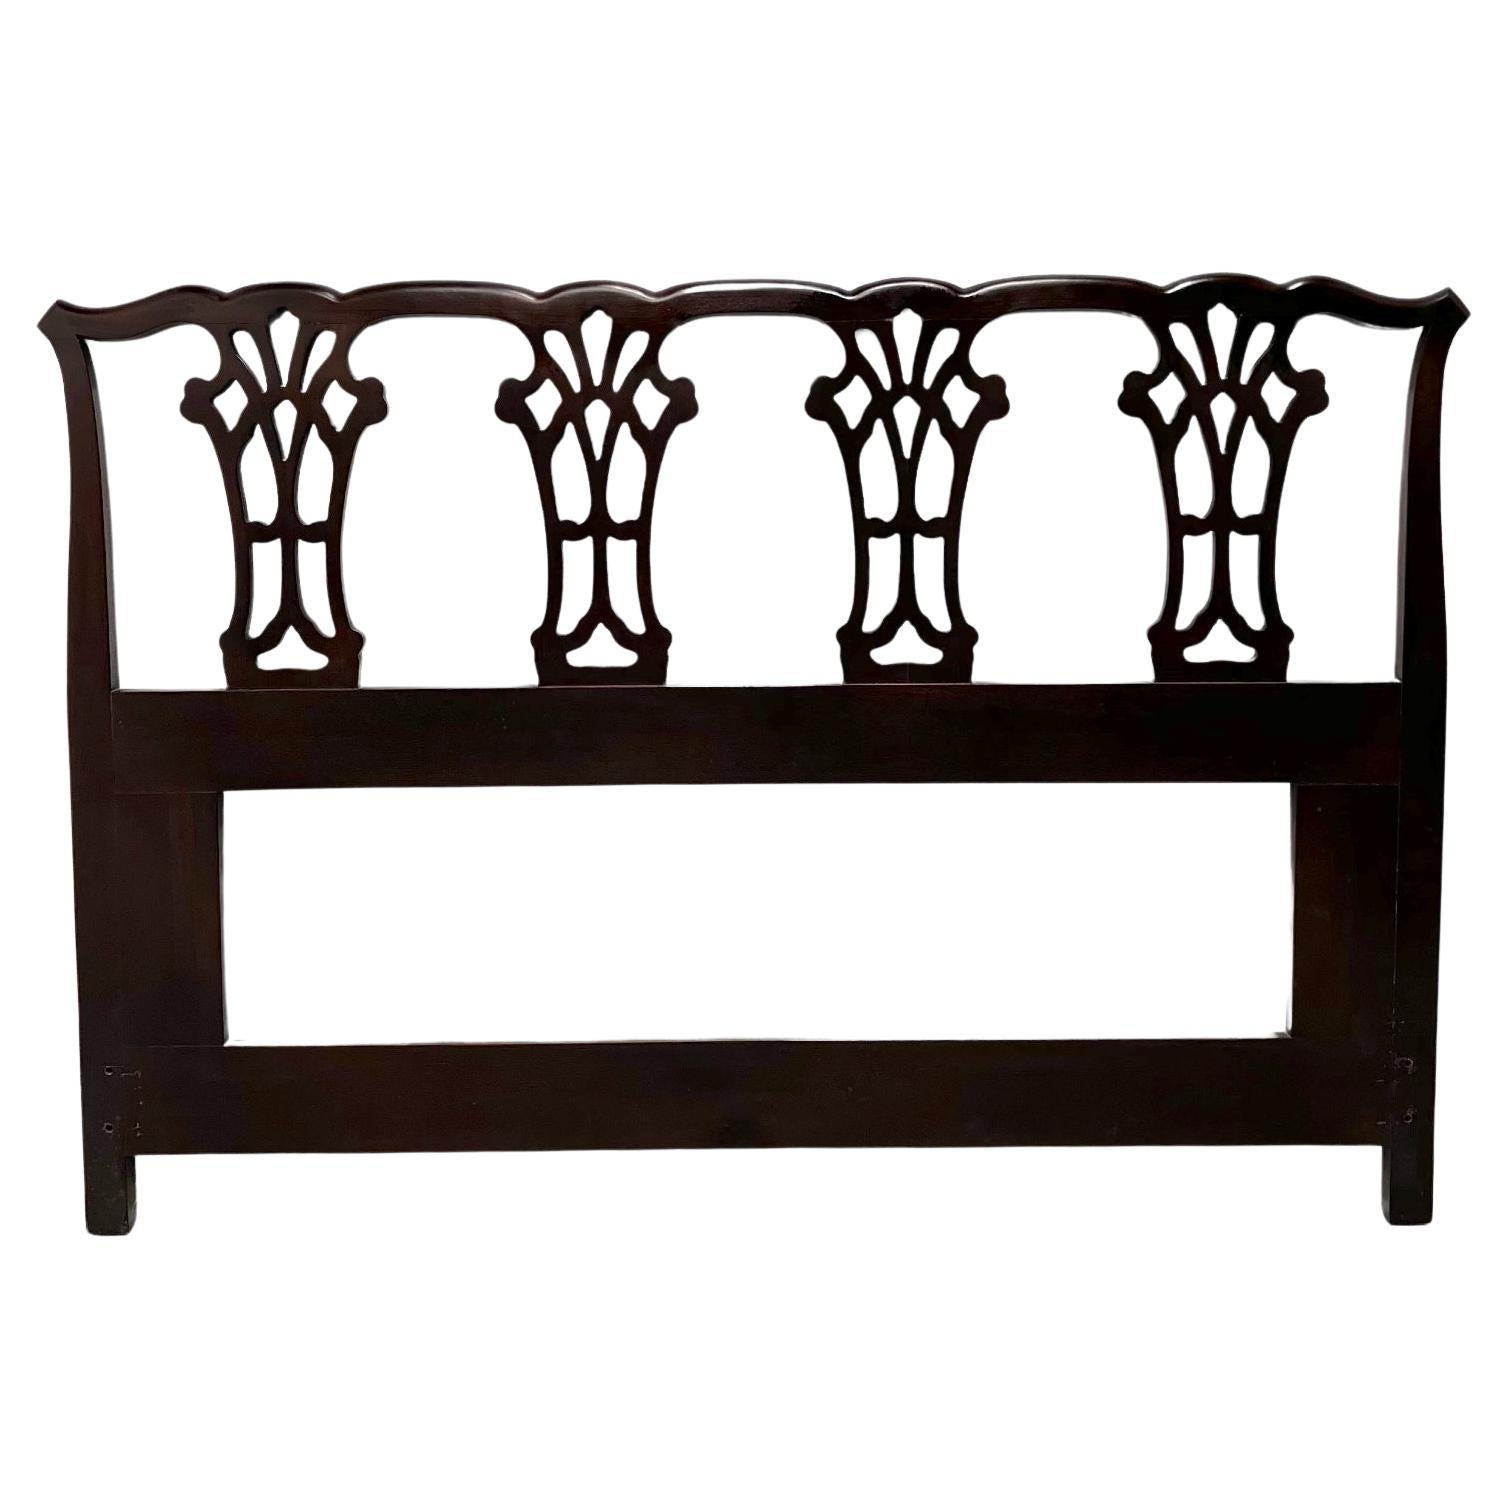 WELLINGTON HALL Mahogany Chippendale Queen Size Headboard